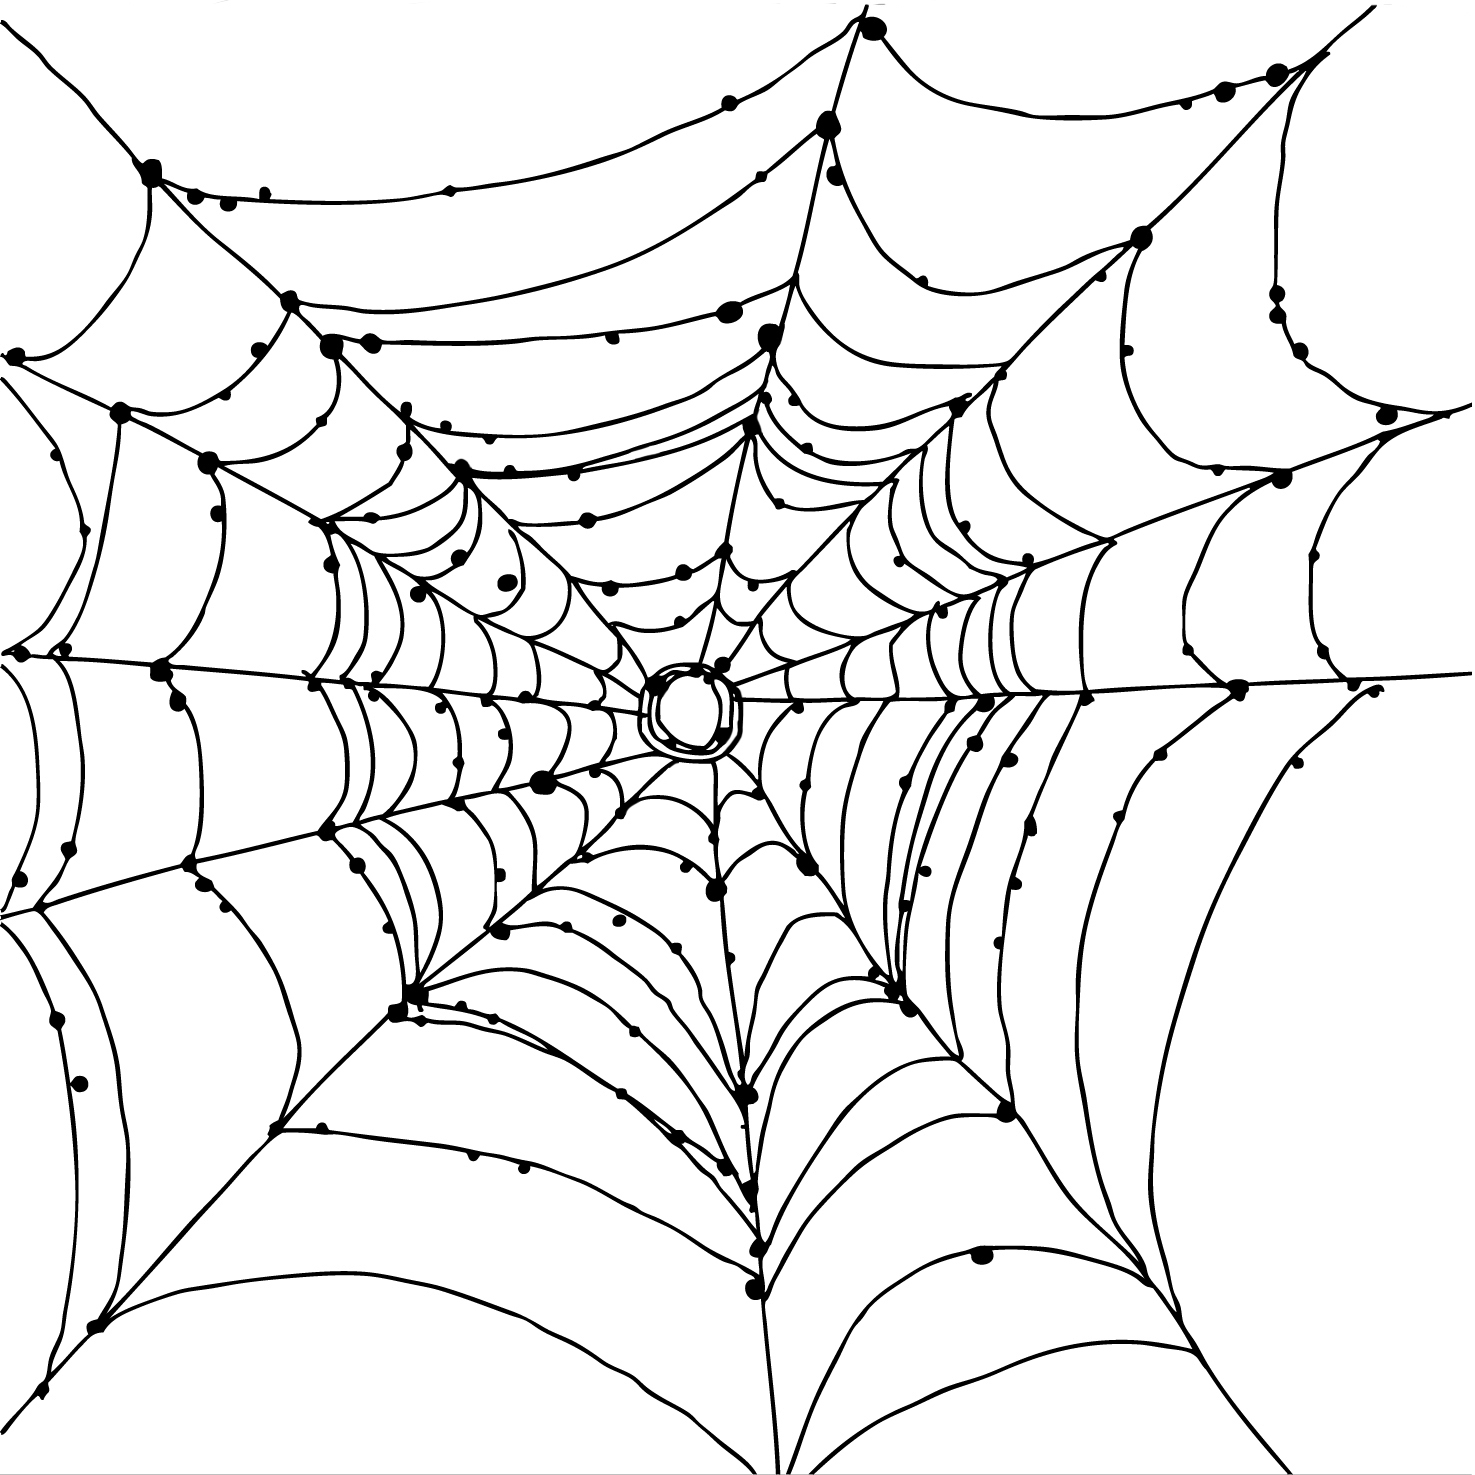 Simple Spider Web Drawing at GetDrawings Free download